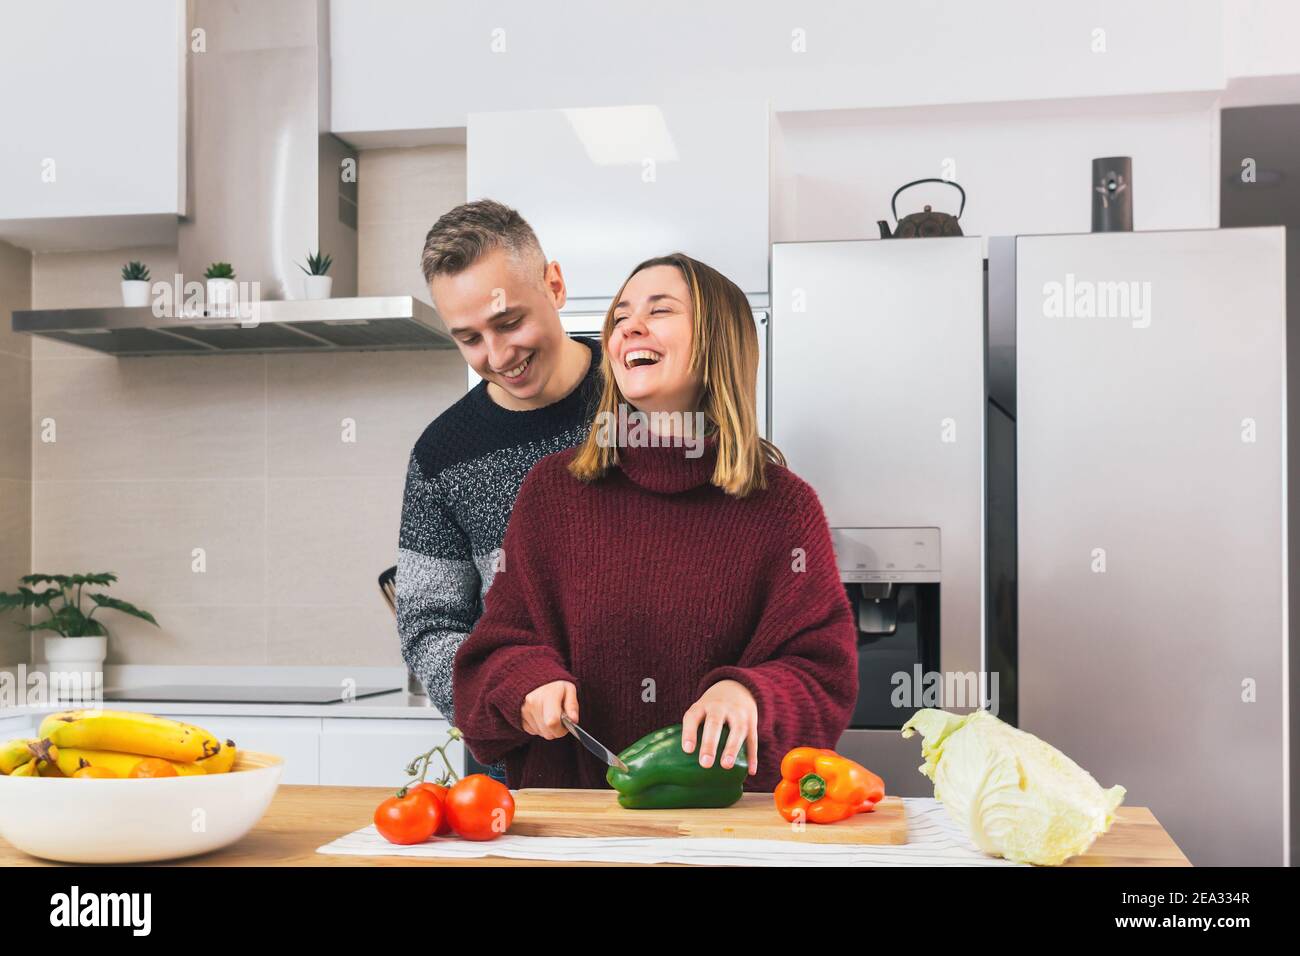 Stock photo of a young couple laughing and cooking healthy food together in the kitchen at home. Cutting vegetables for a vegan meal Stock Photo